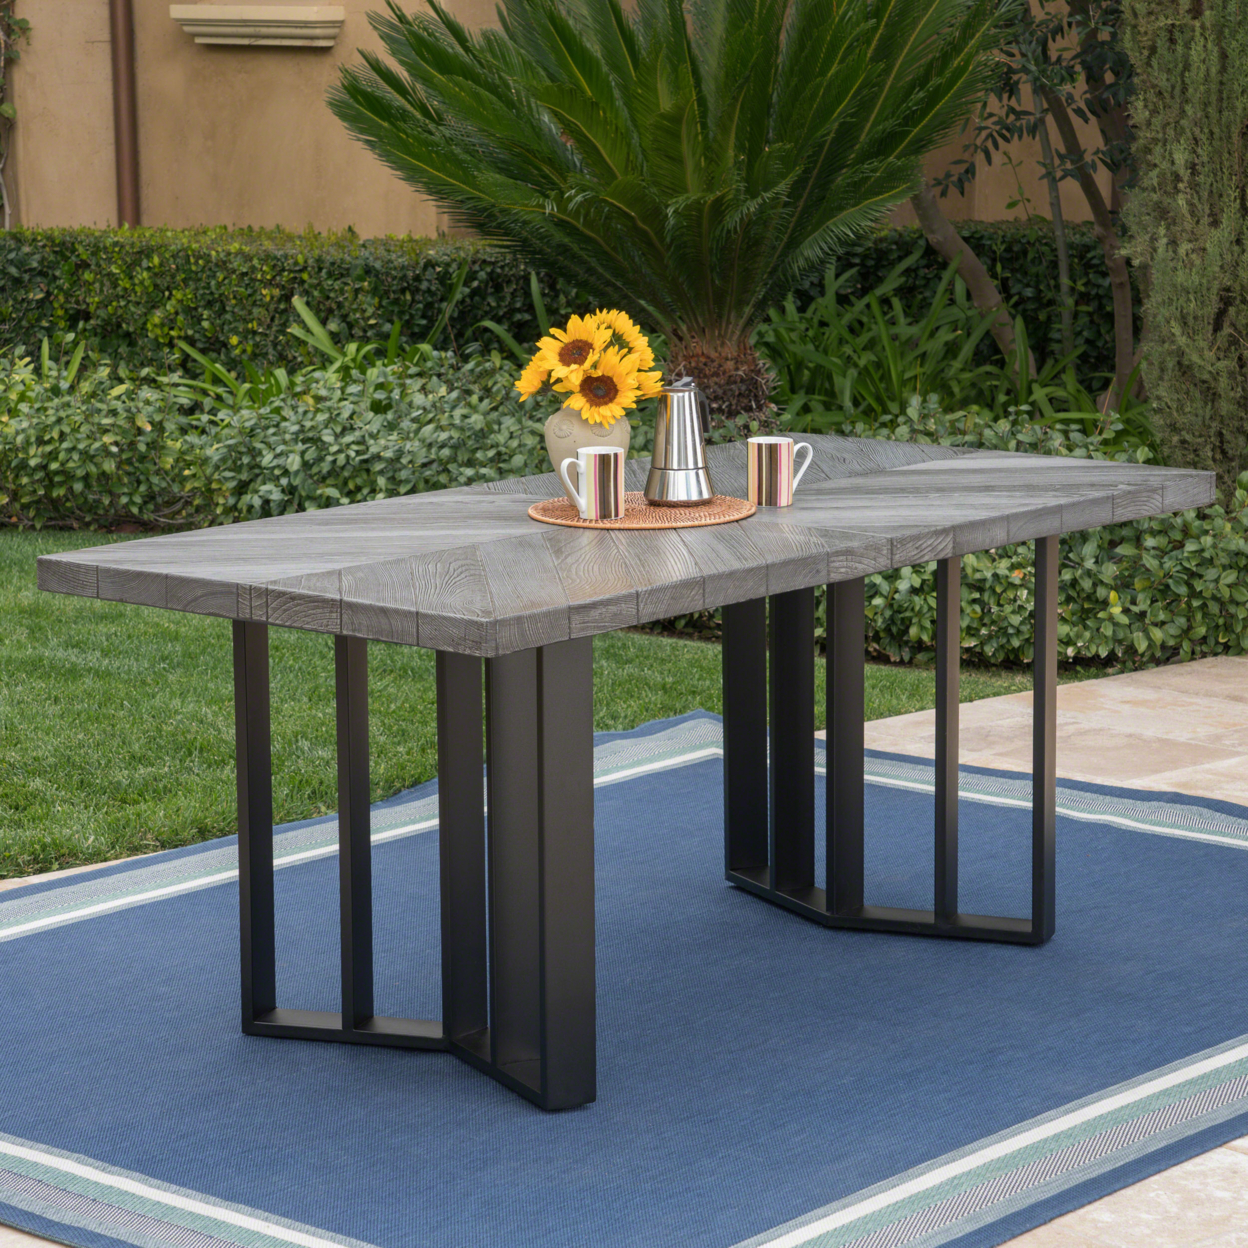 Santa Rosa Outdoor Finish Light Weight Concrete Dining Table - Textured Gray